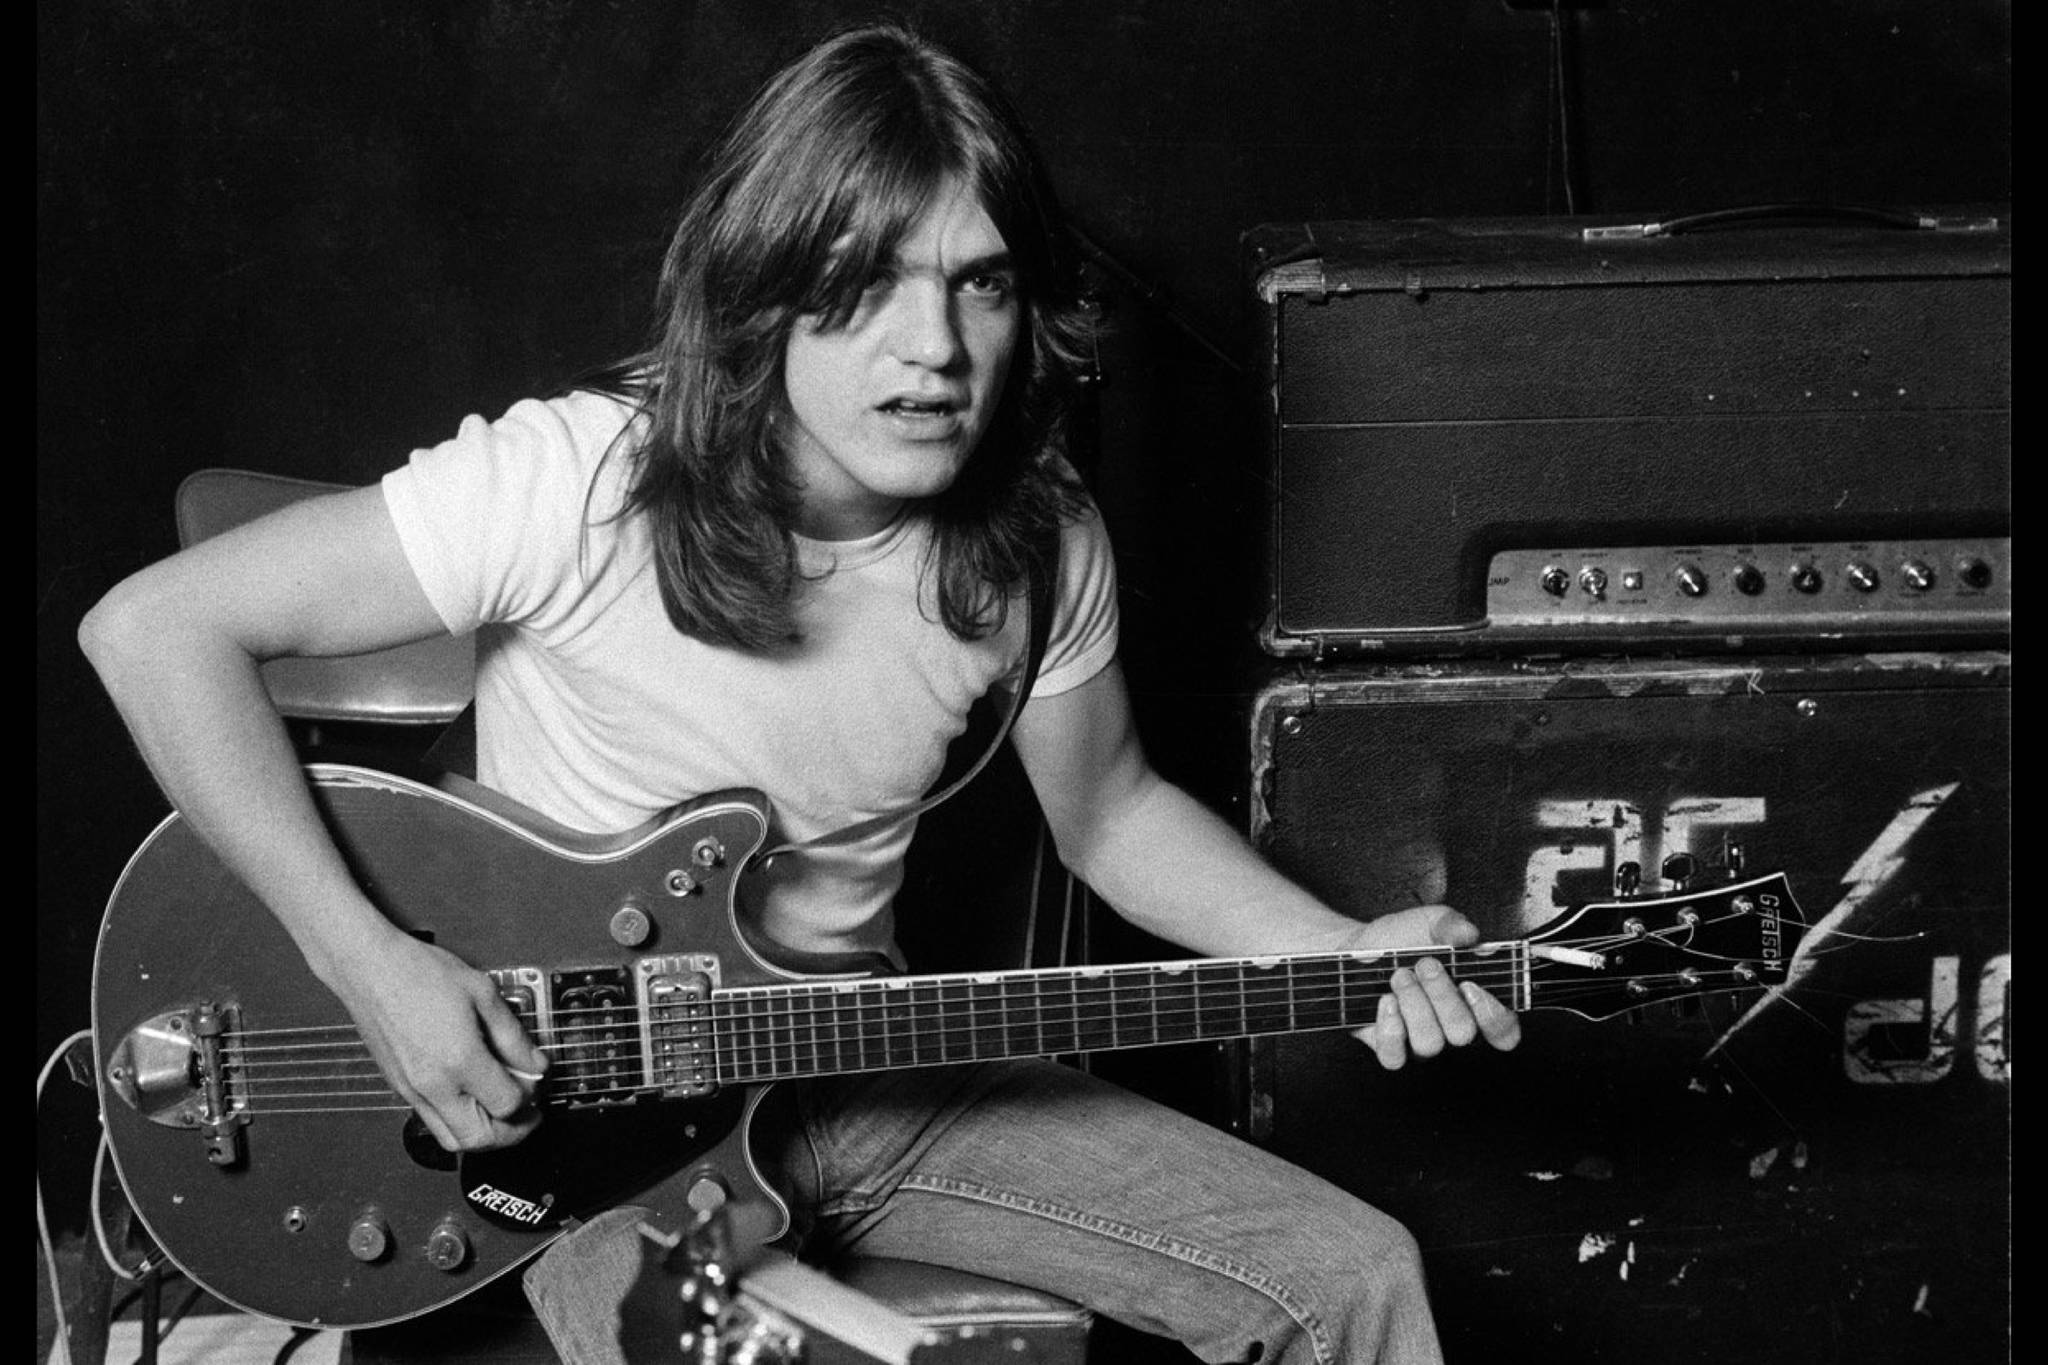 Who Was The Songwriter For AC/DC?